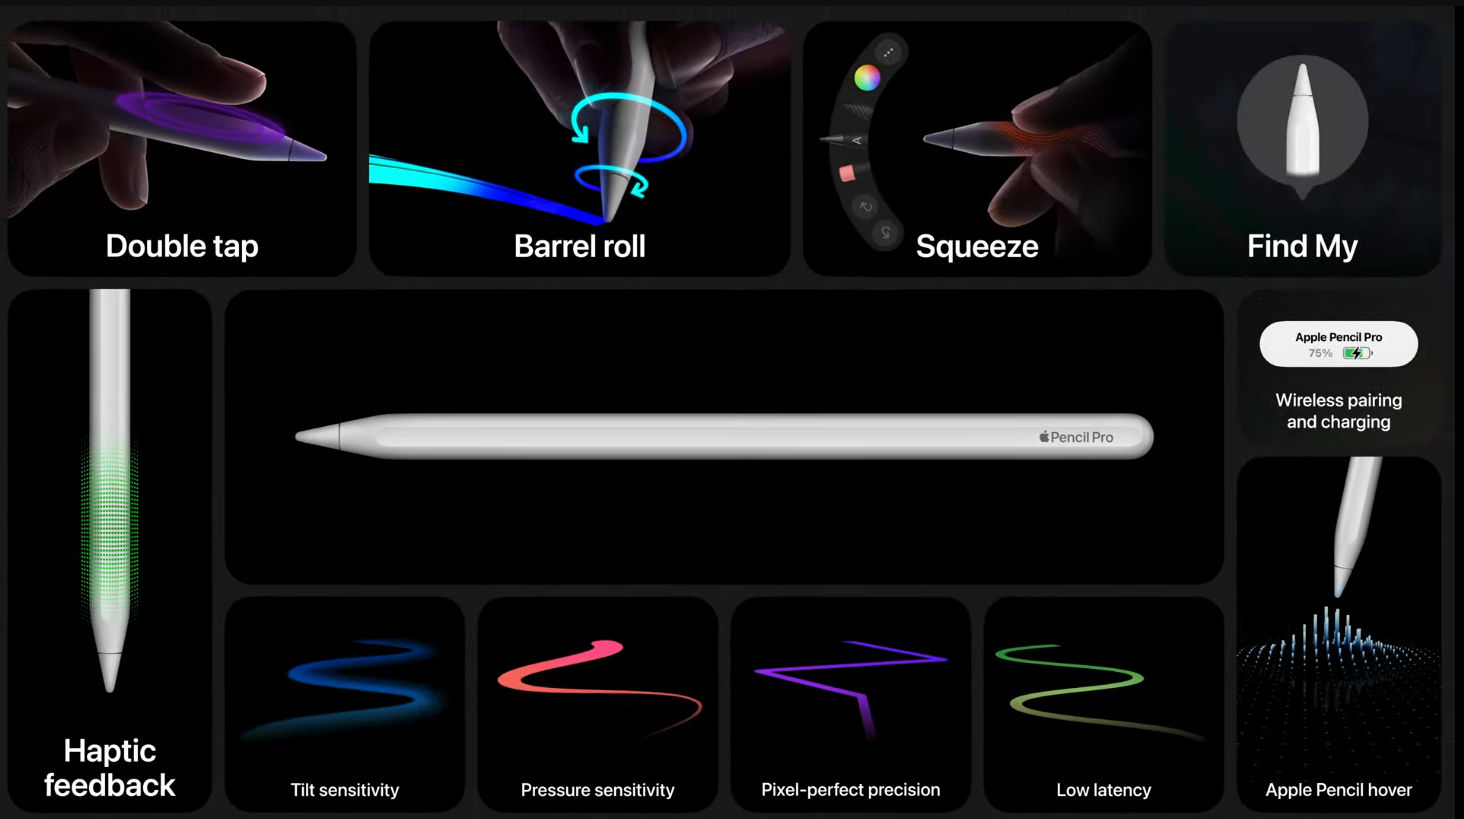 Apple Pencil Pro with new squeeze gesture, haptic feedback, Find My